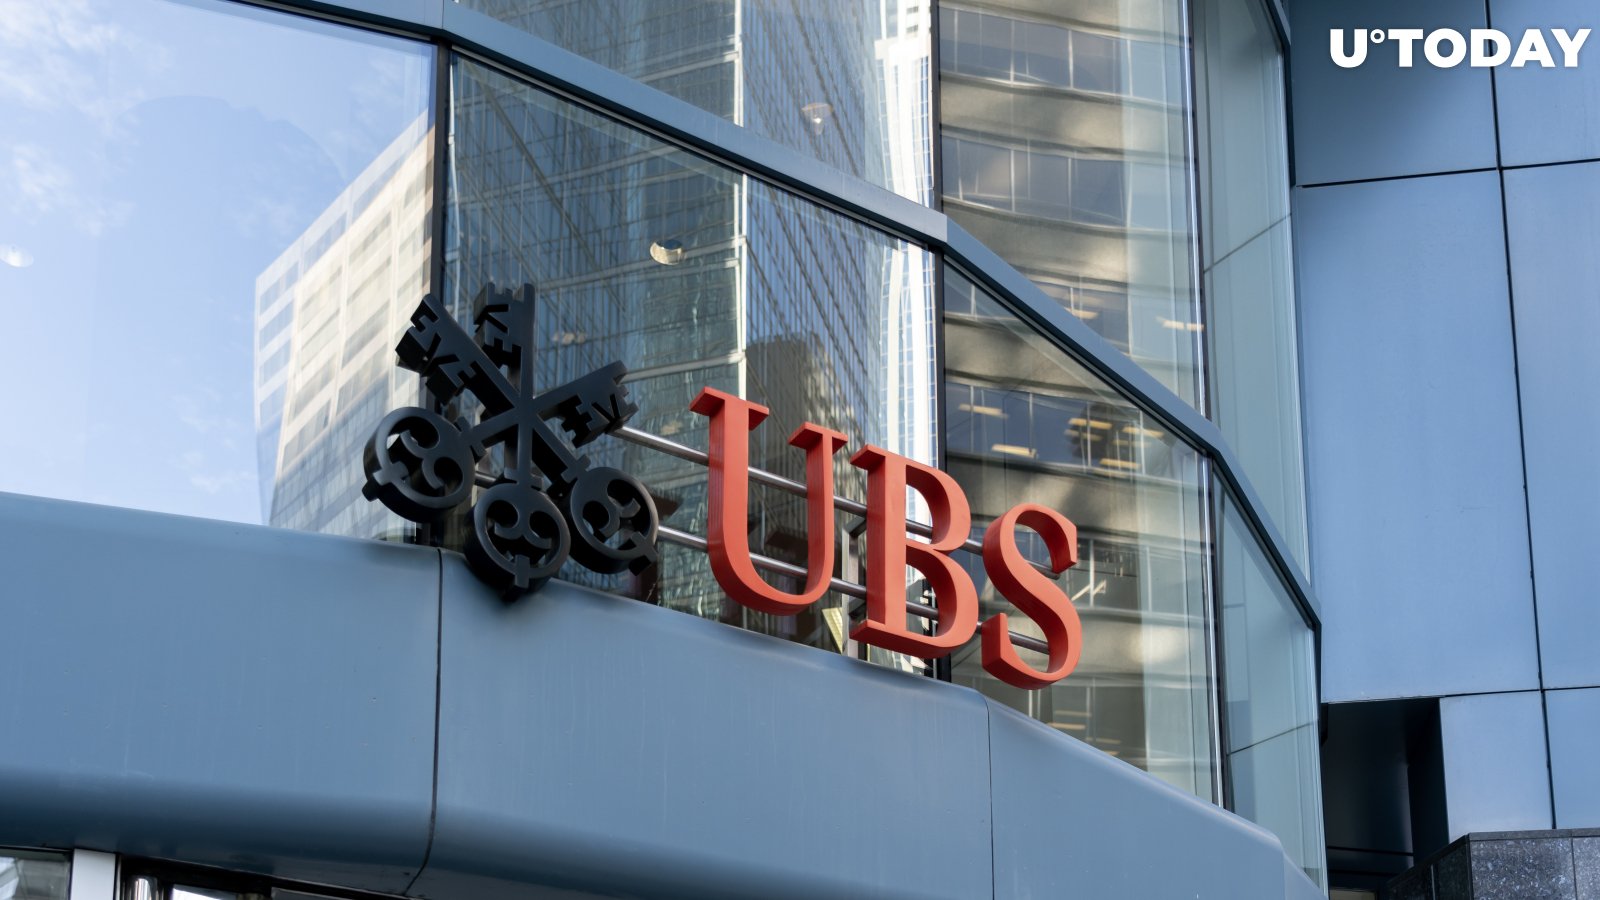 UBS CEO Rejects Crypto: “We Don't Advise on Speculation”